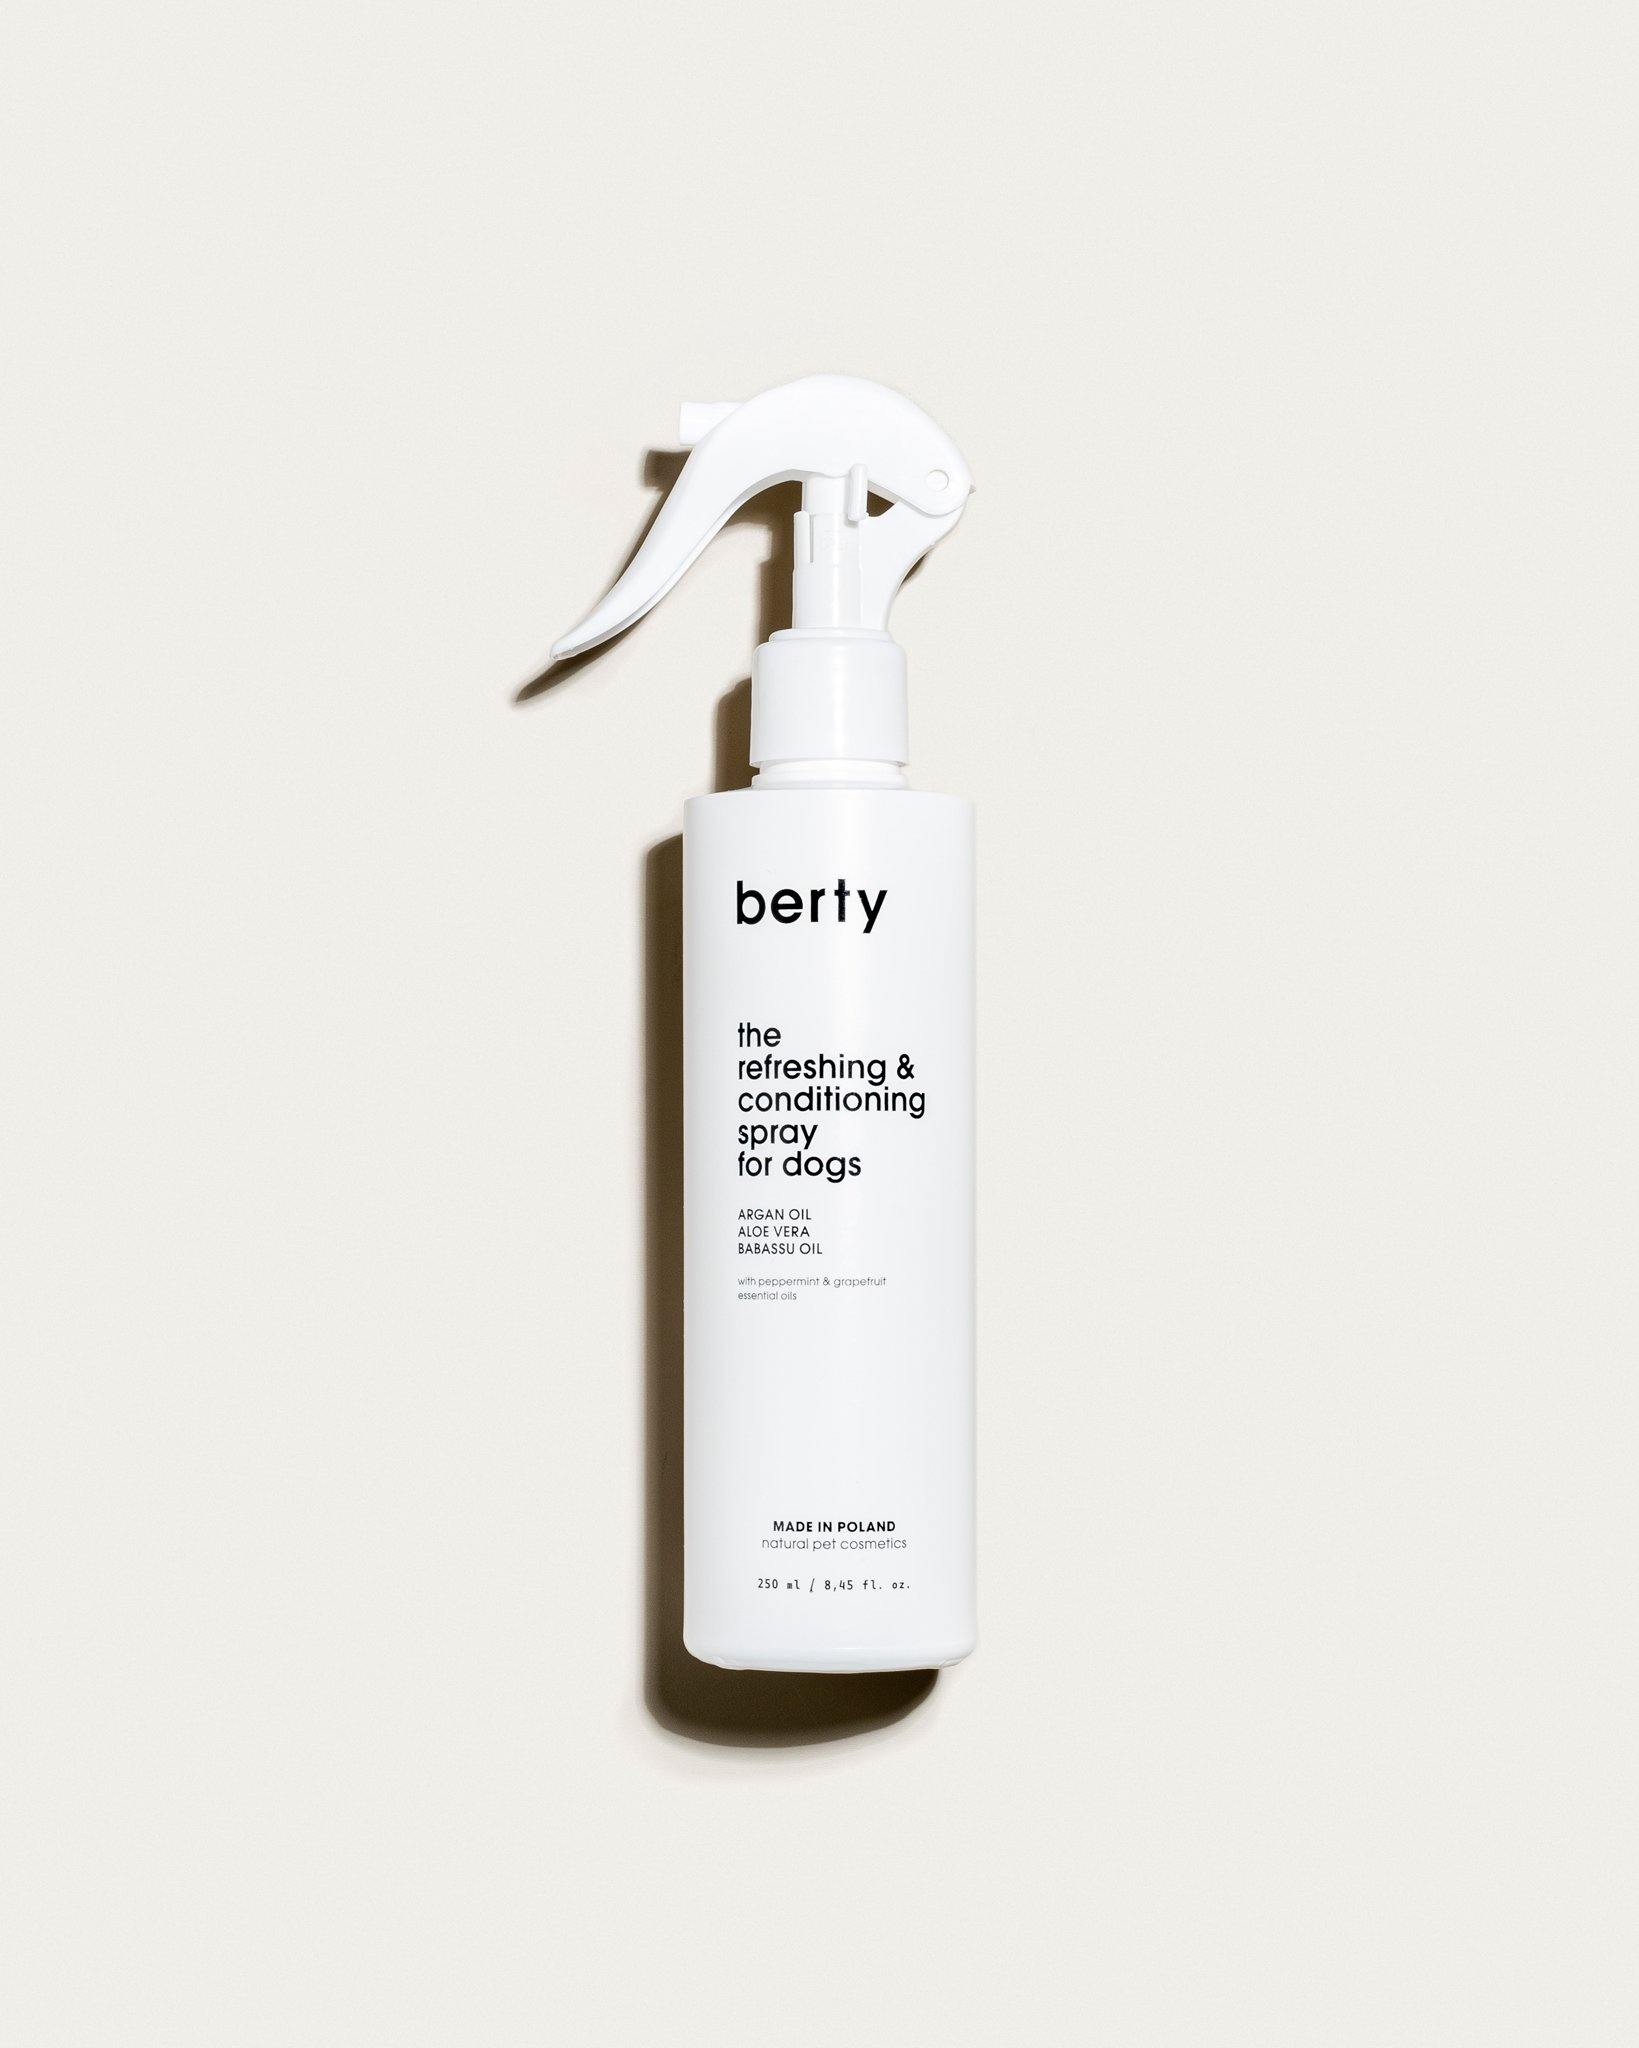 the refreshing & conditioning spray for dogs - berty